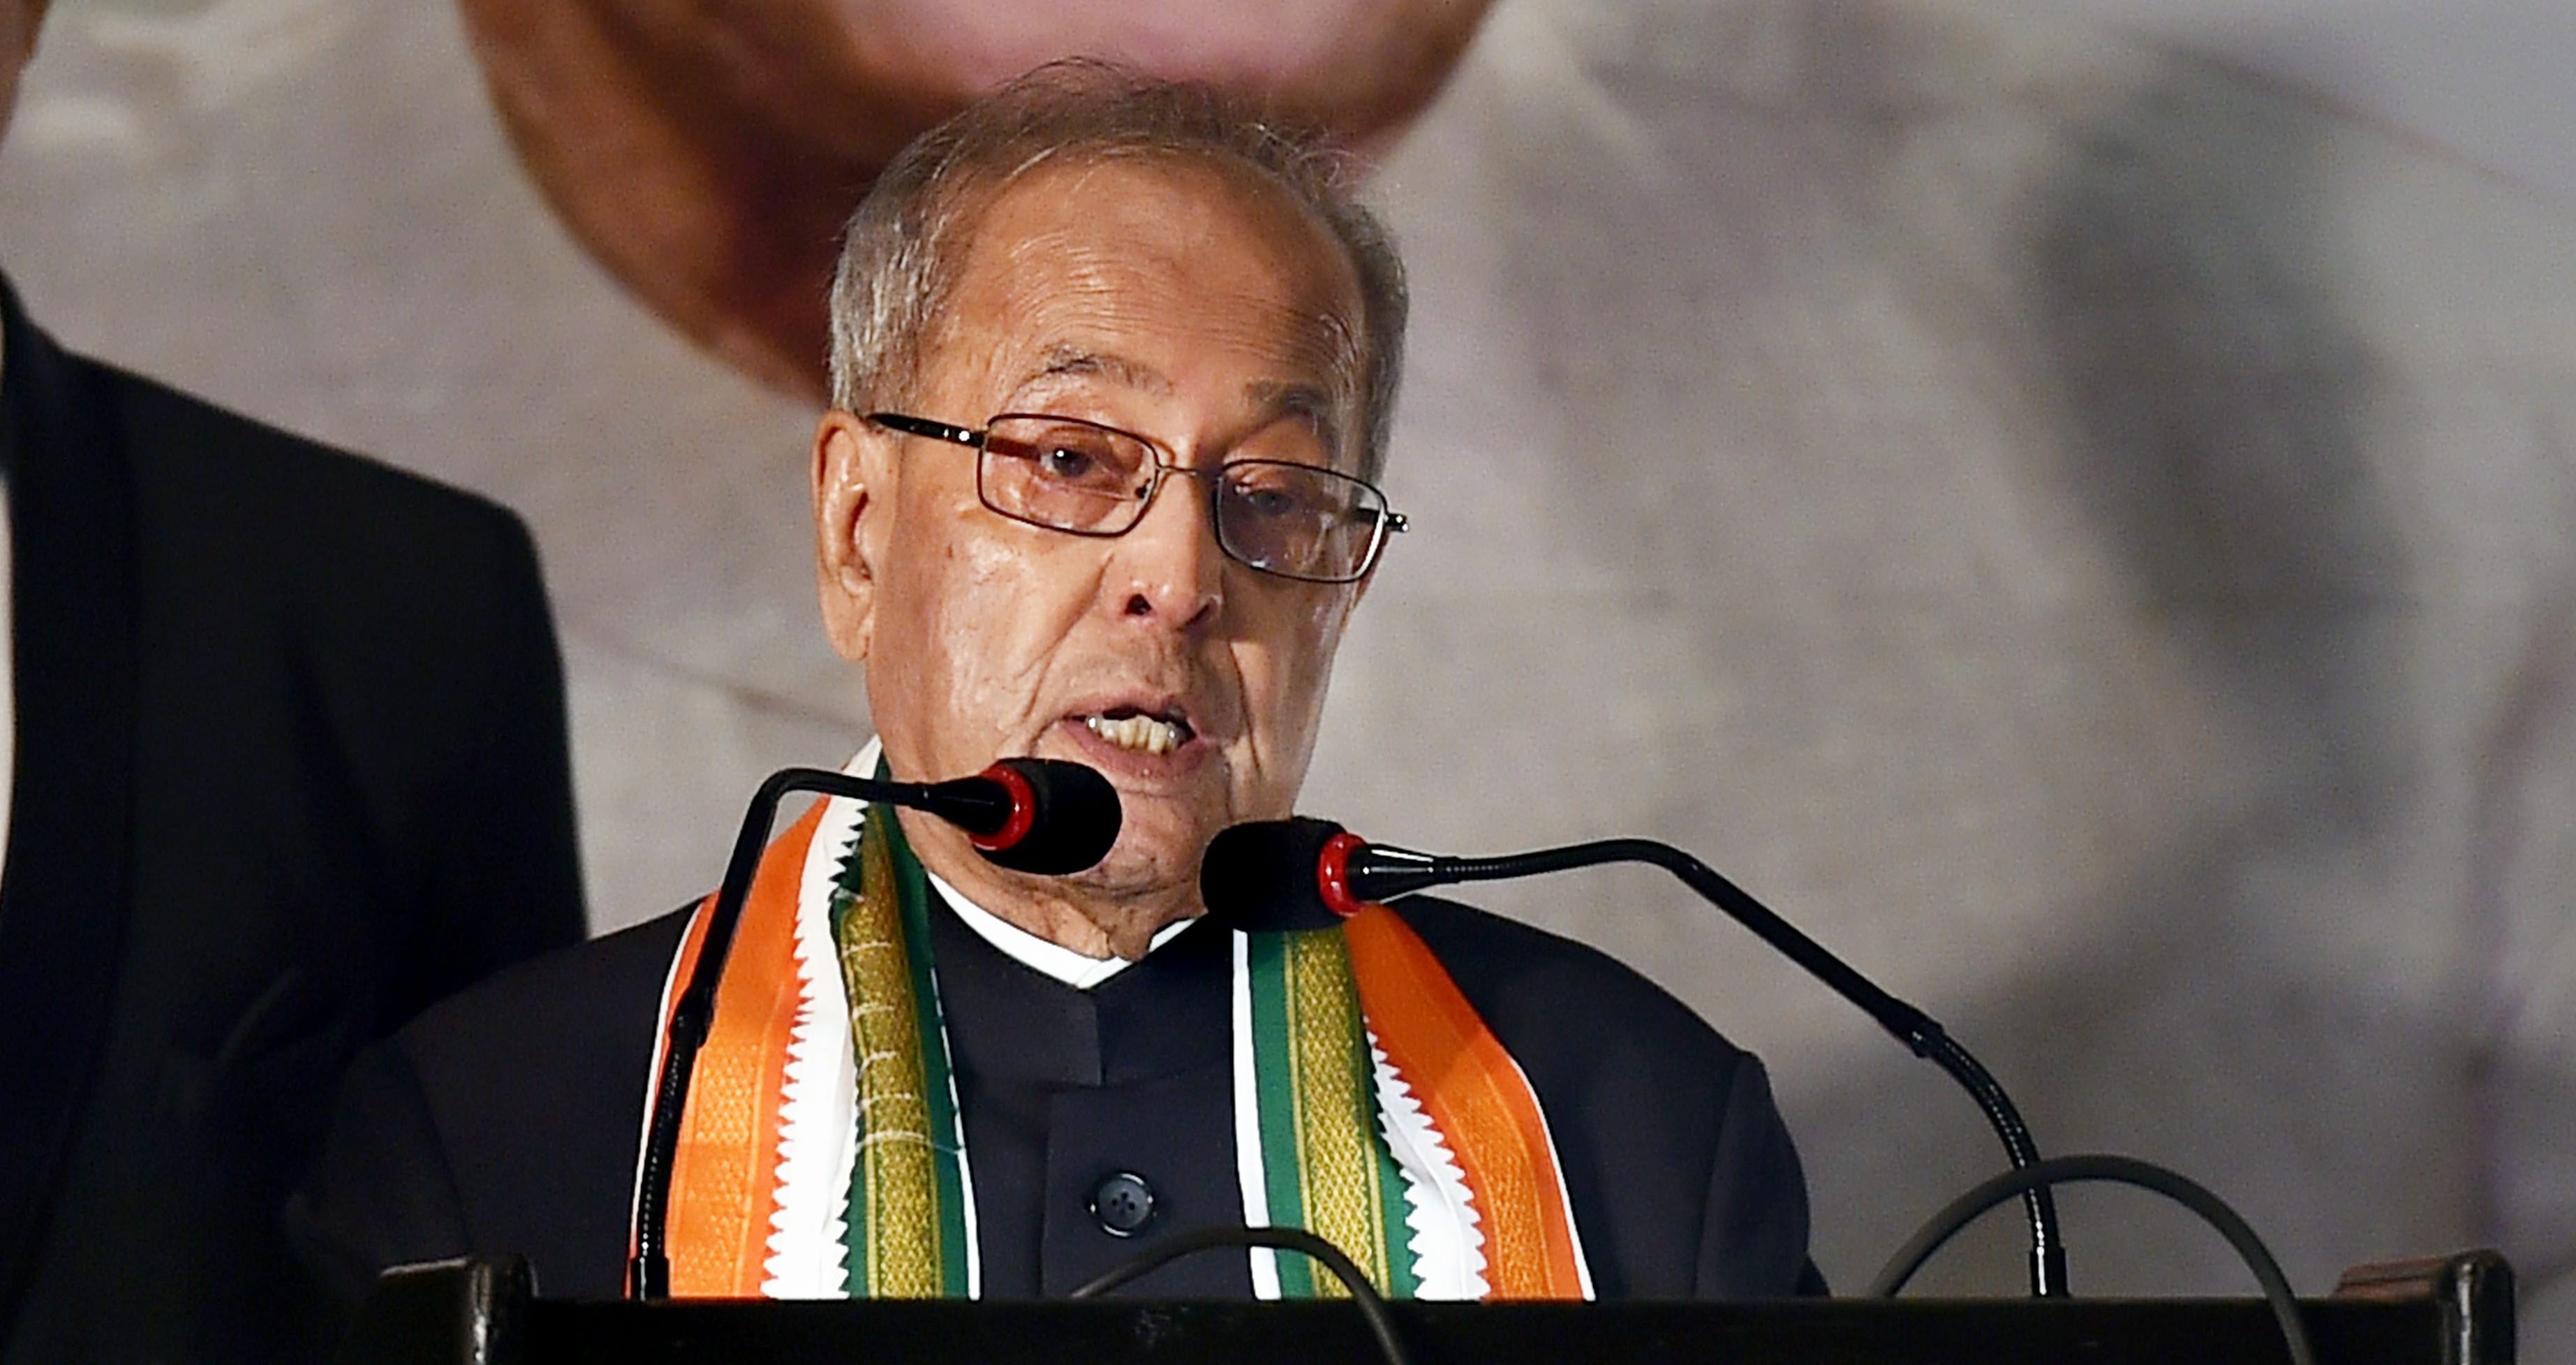 Kolkata: Former President Pranab Mukherjee addresses a special session on 'Prospects for Economic Growth and the Policy Imperatives for India' in Kolkata on Wednesday evening. PTI Photo by Swapan Mahapatra (PTI2_28_2018_000219B)